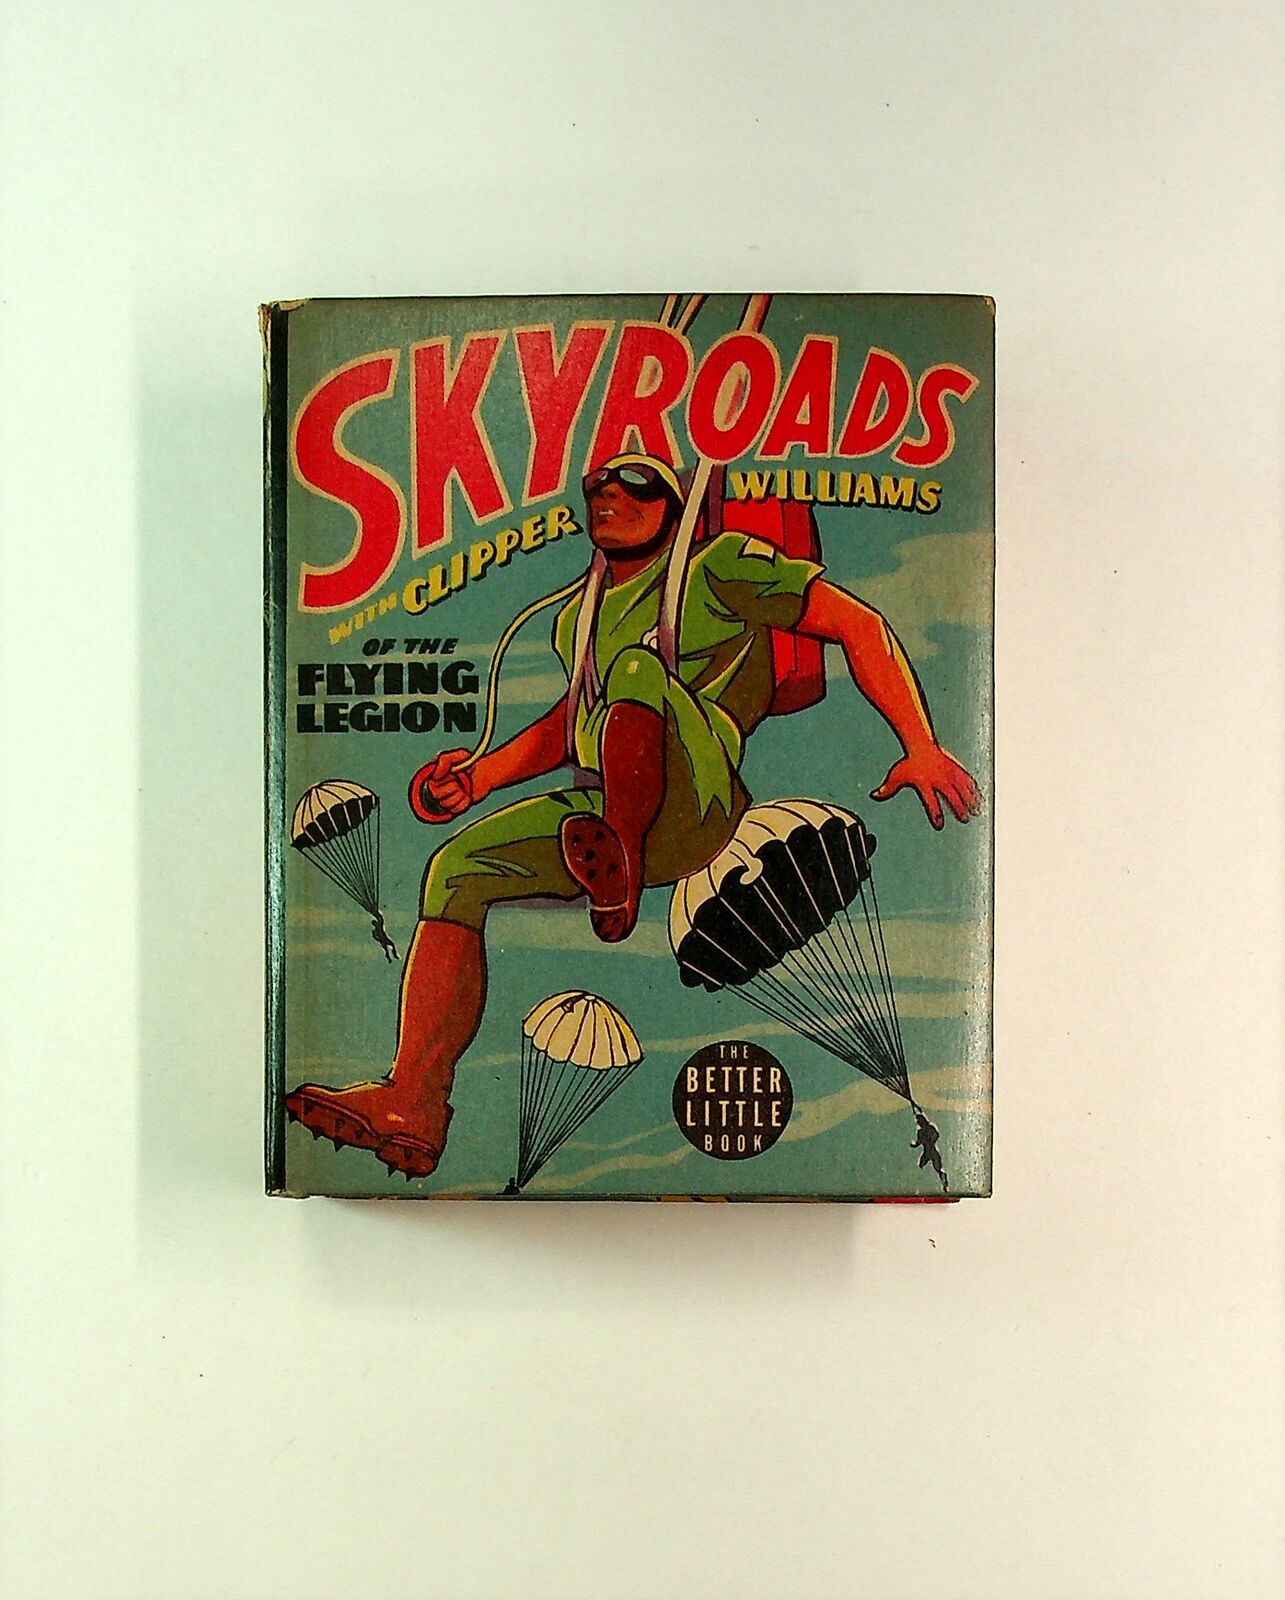 Skyroads with Clipper Williams of the Flying Legion #1439 VF 1938